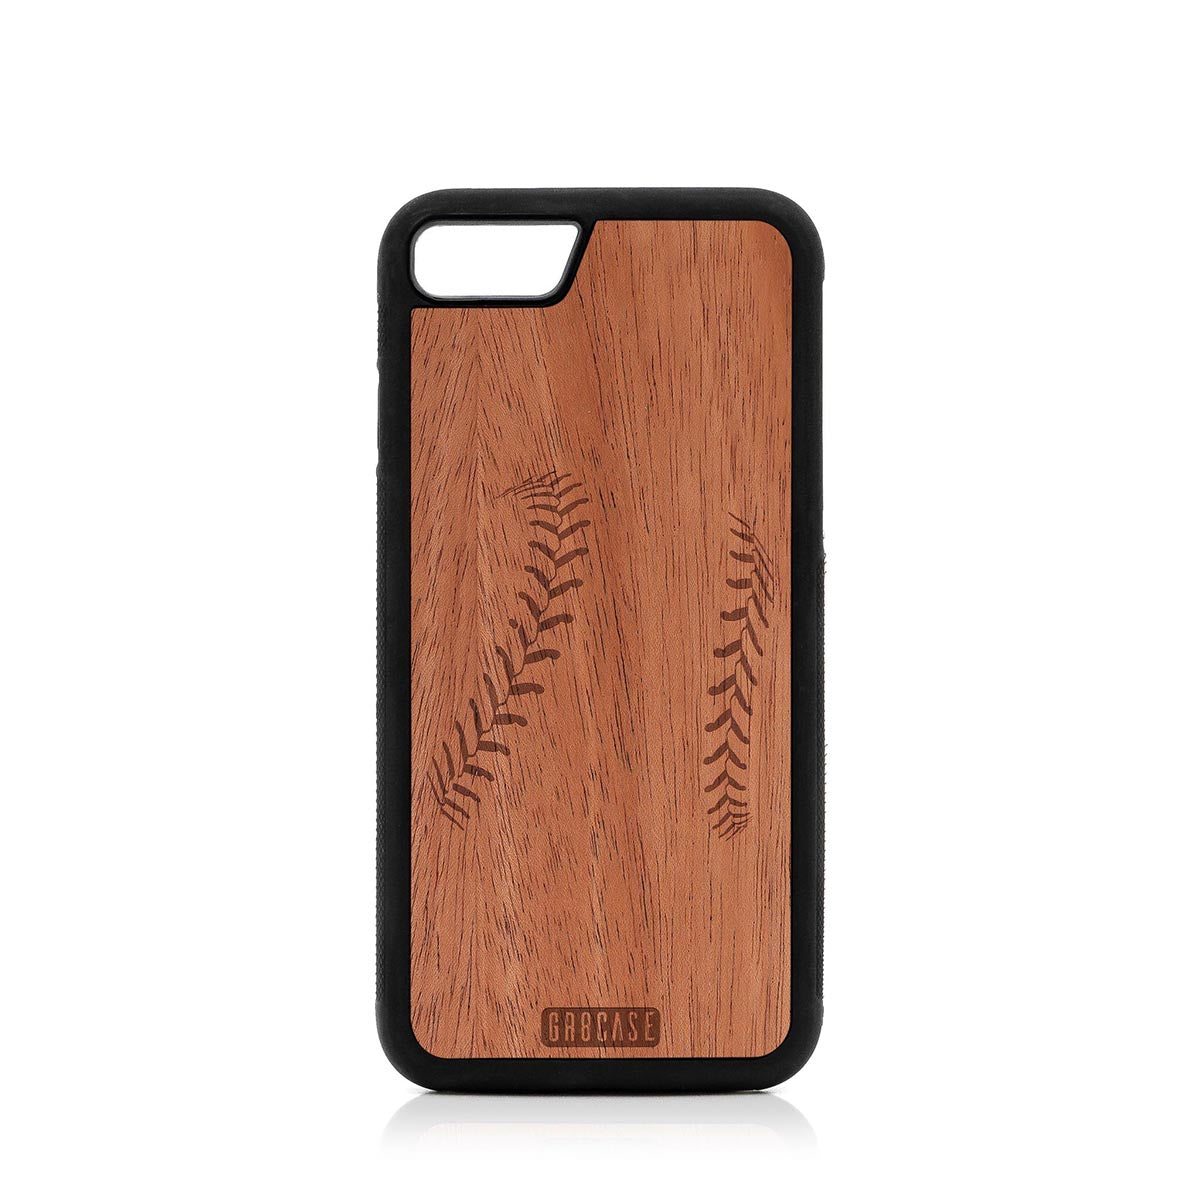 Baseball Stitches Design Wood Case For iPhone 7/8 by GR8CASE